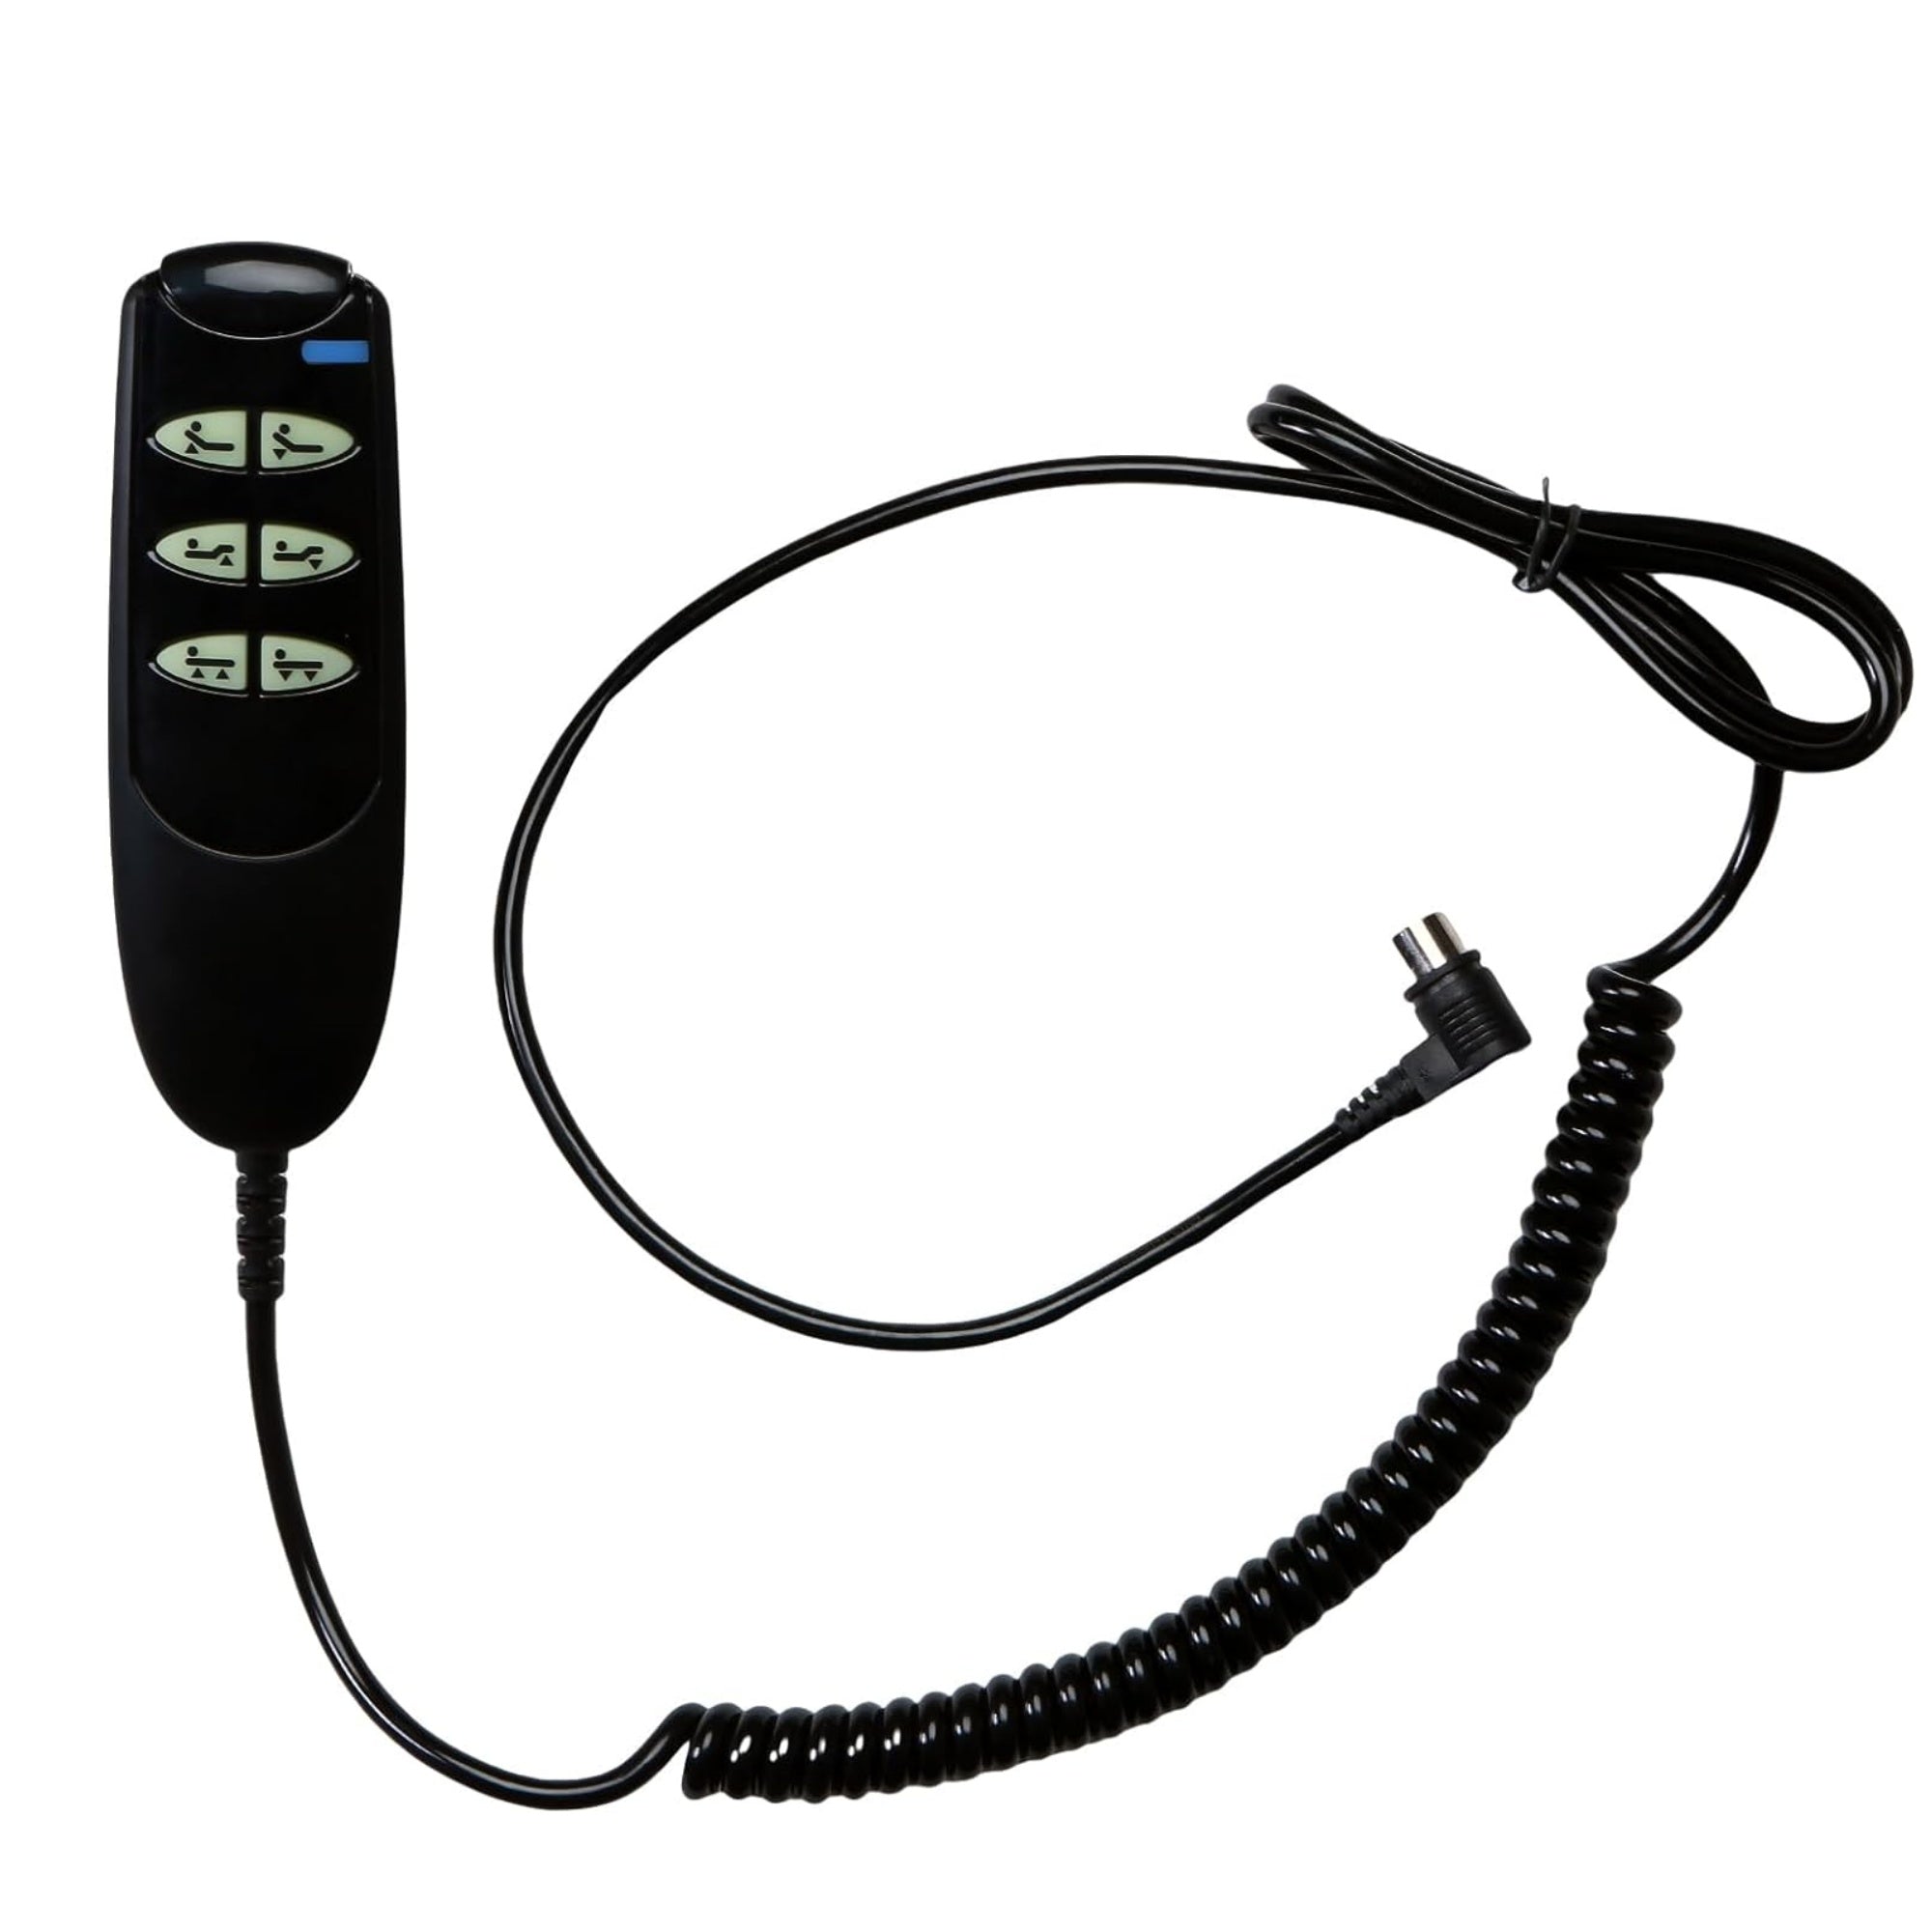 Fruhdi Electric Drive Medical Hospital Beds Richmat 6 Button 5 Pin Remote Hand Control Handset